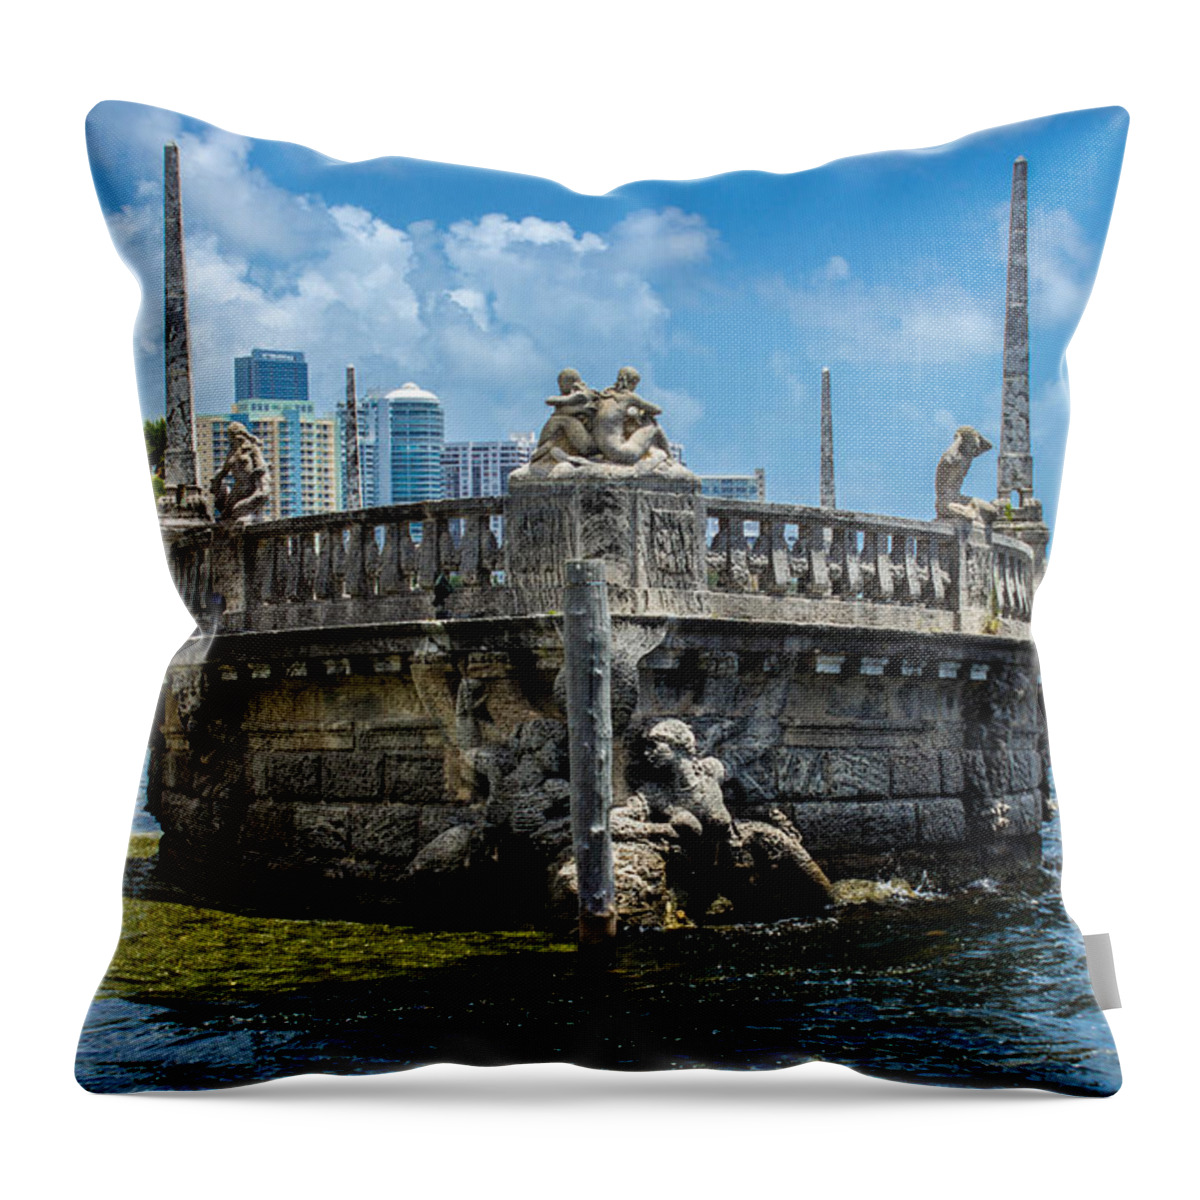 Museum Throw Pillow featuring the photograph Sculptures by the sea by George Kenhan